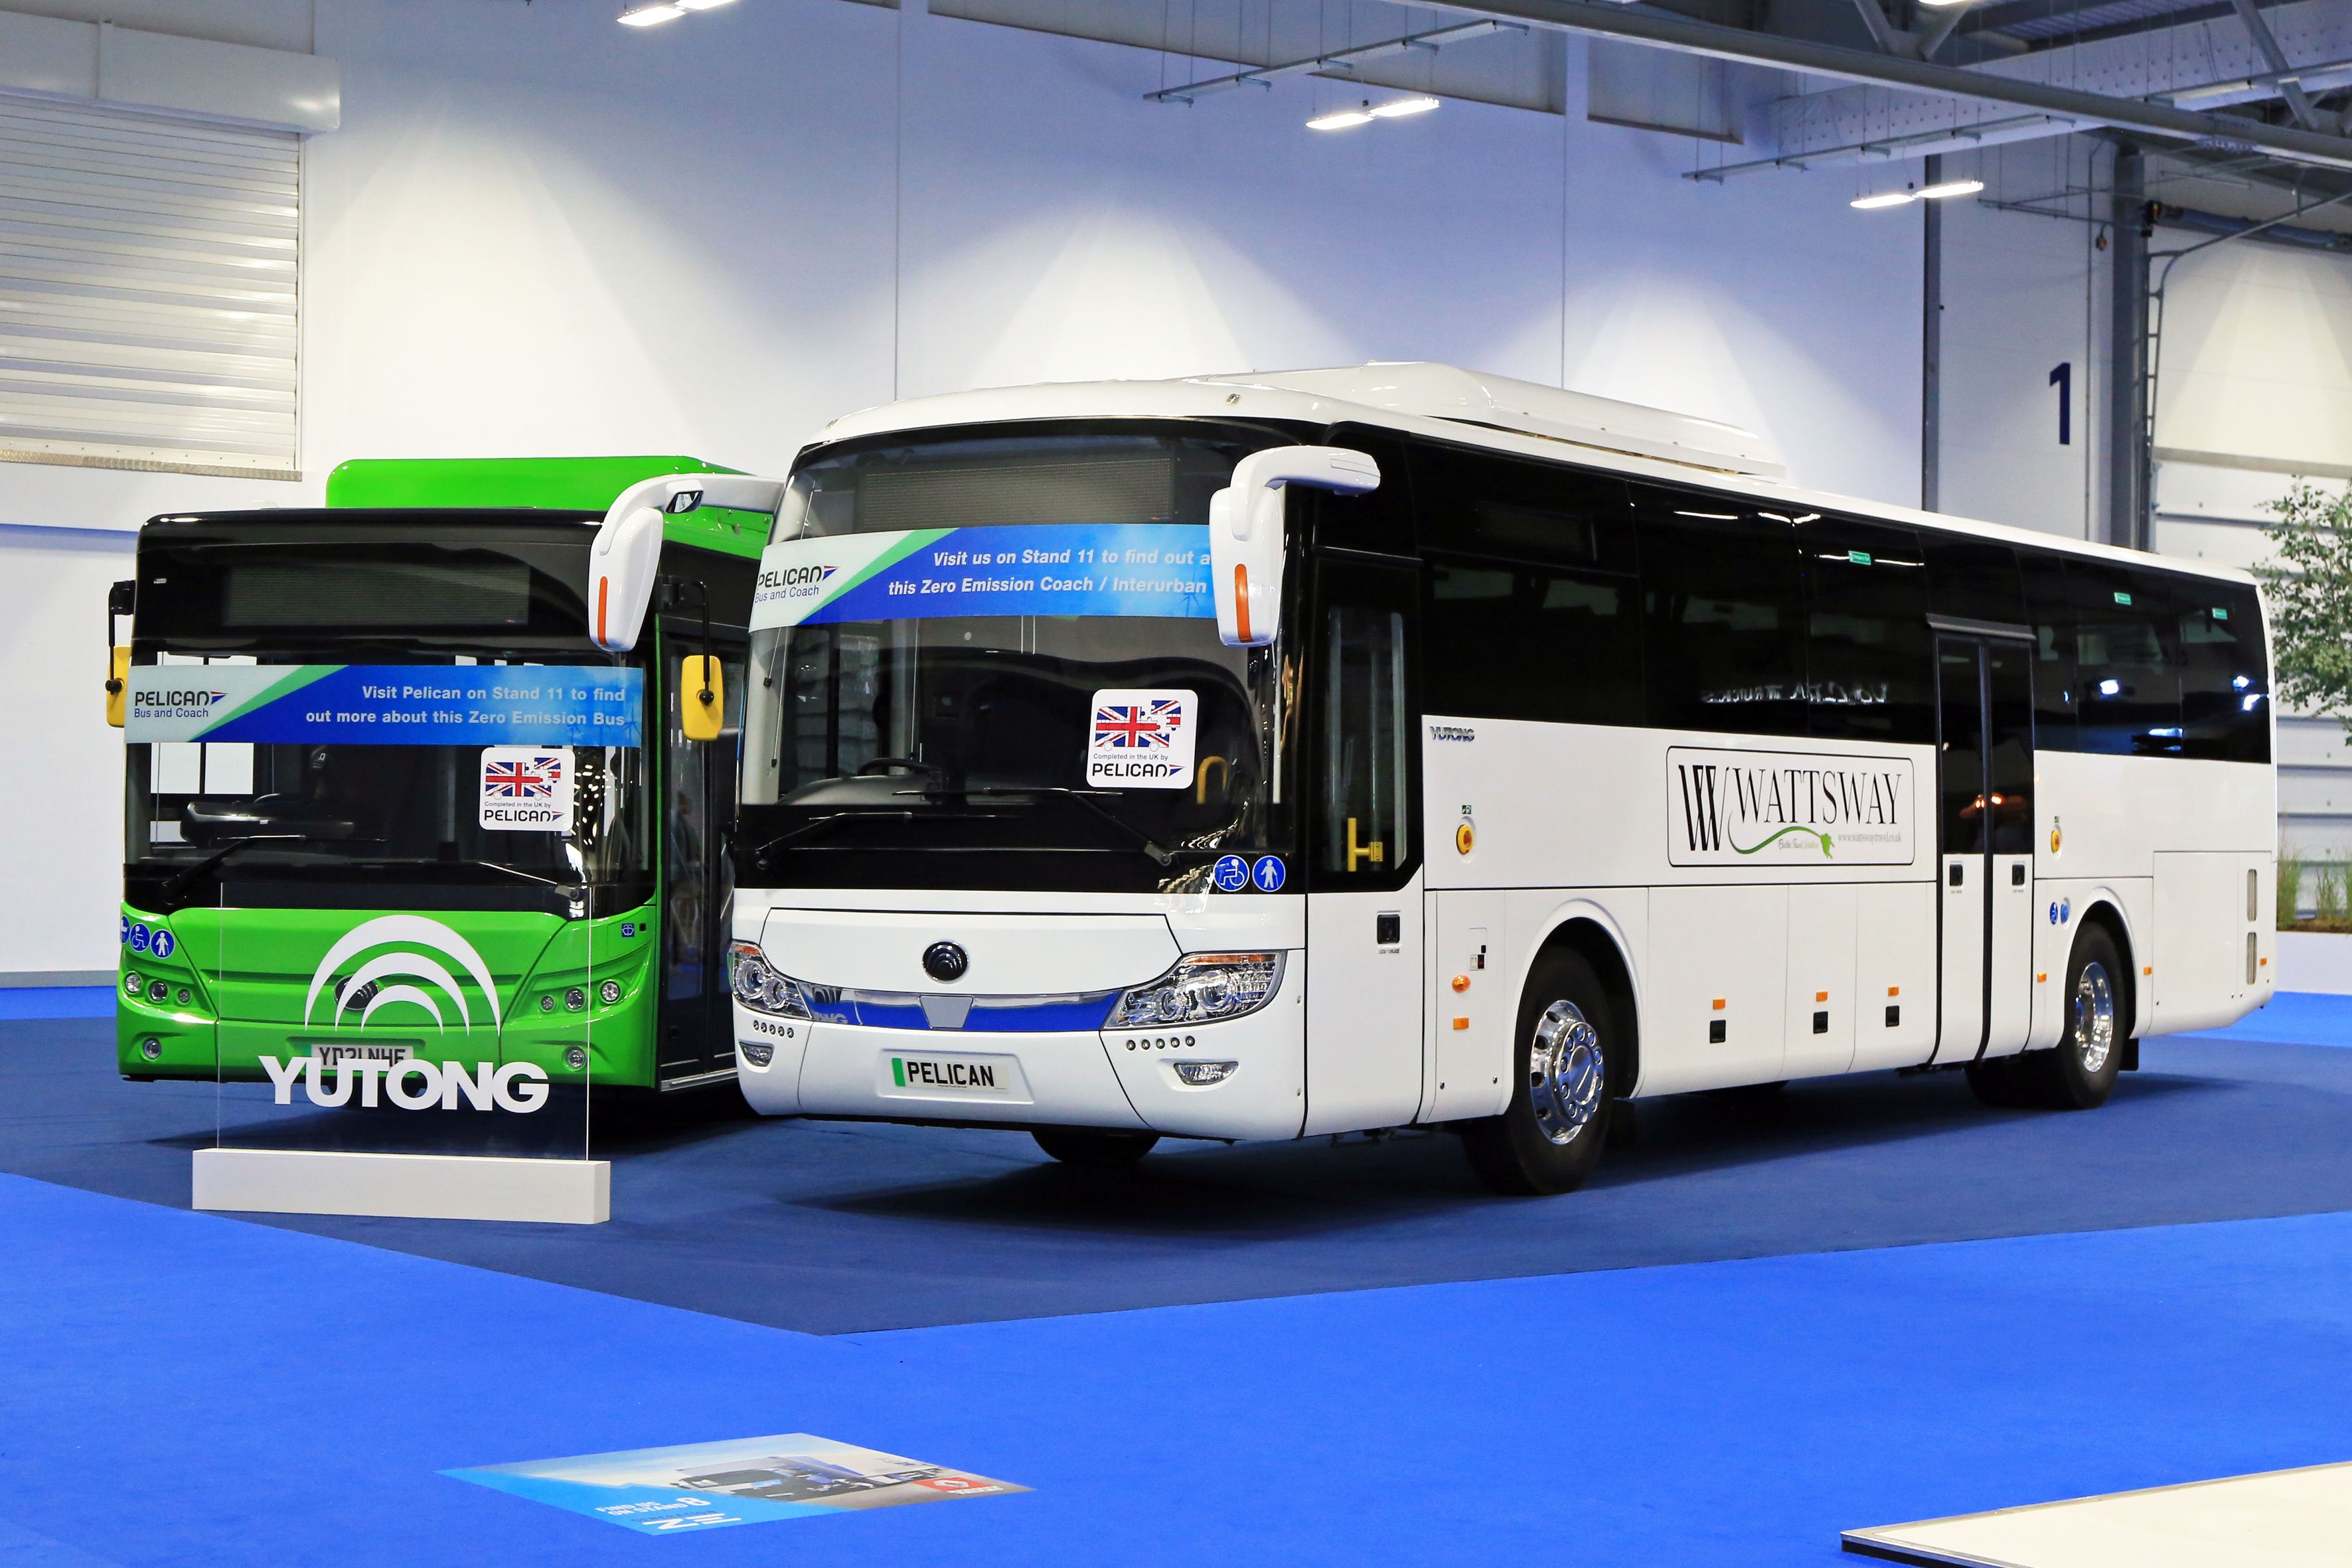 Yutong electric coach goes to Wattsway Travel